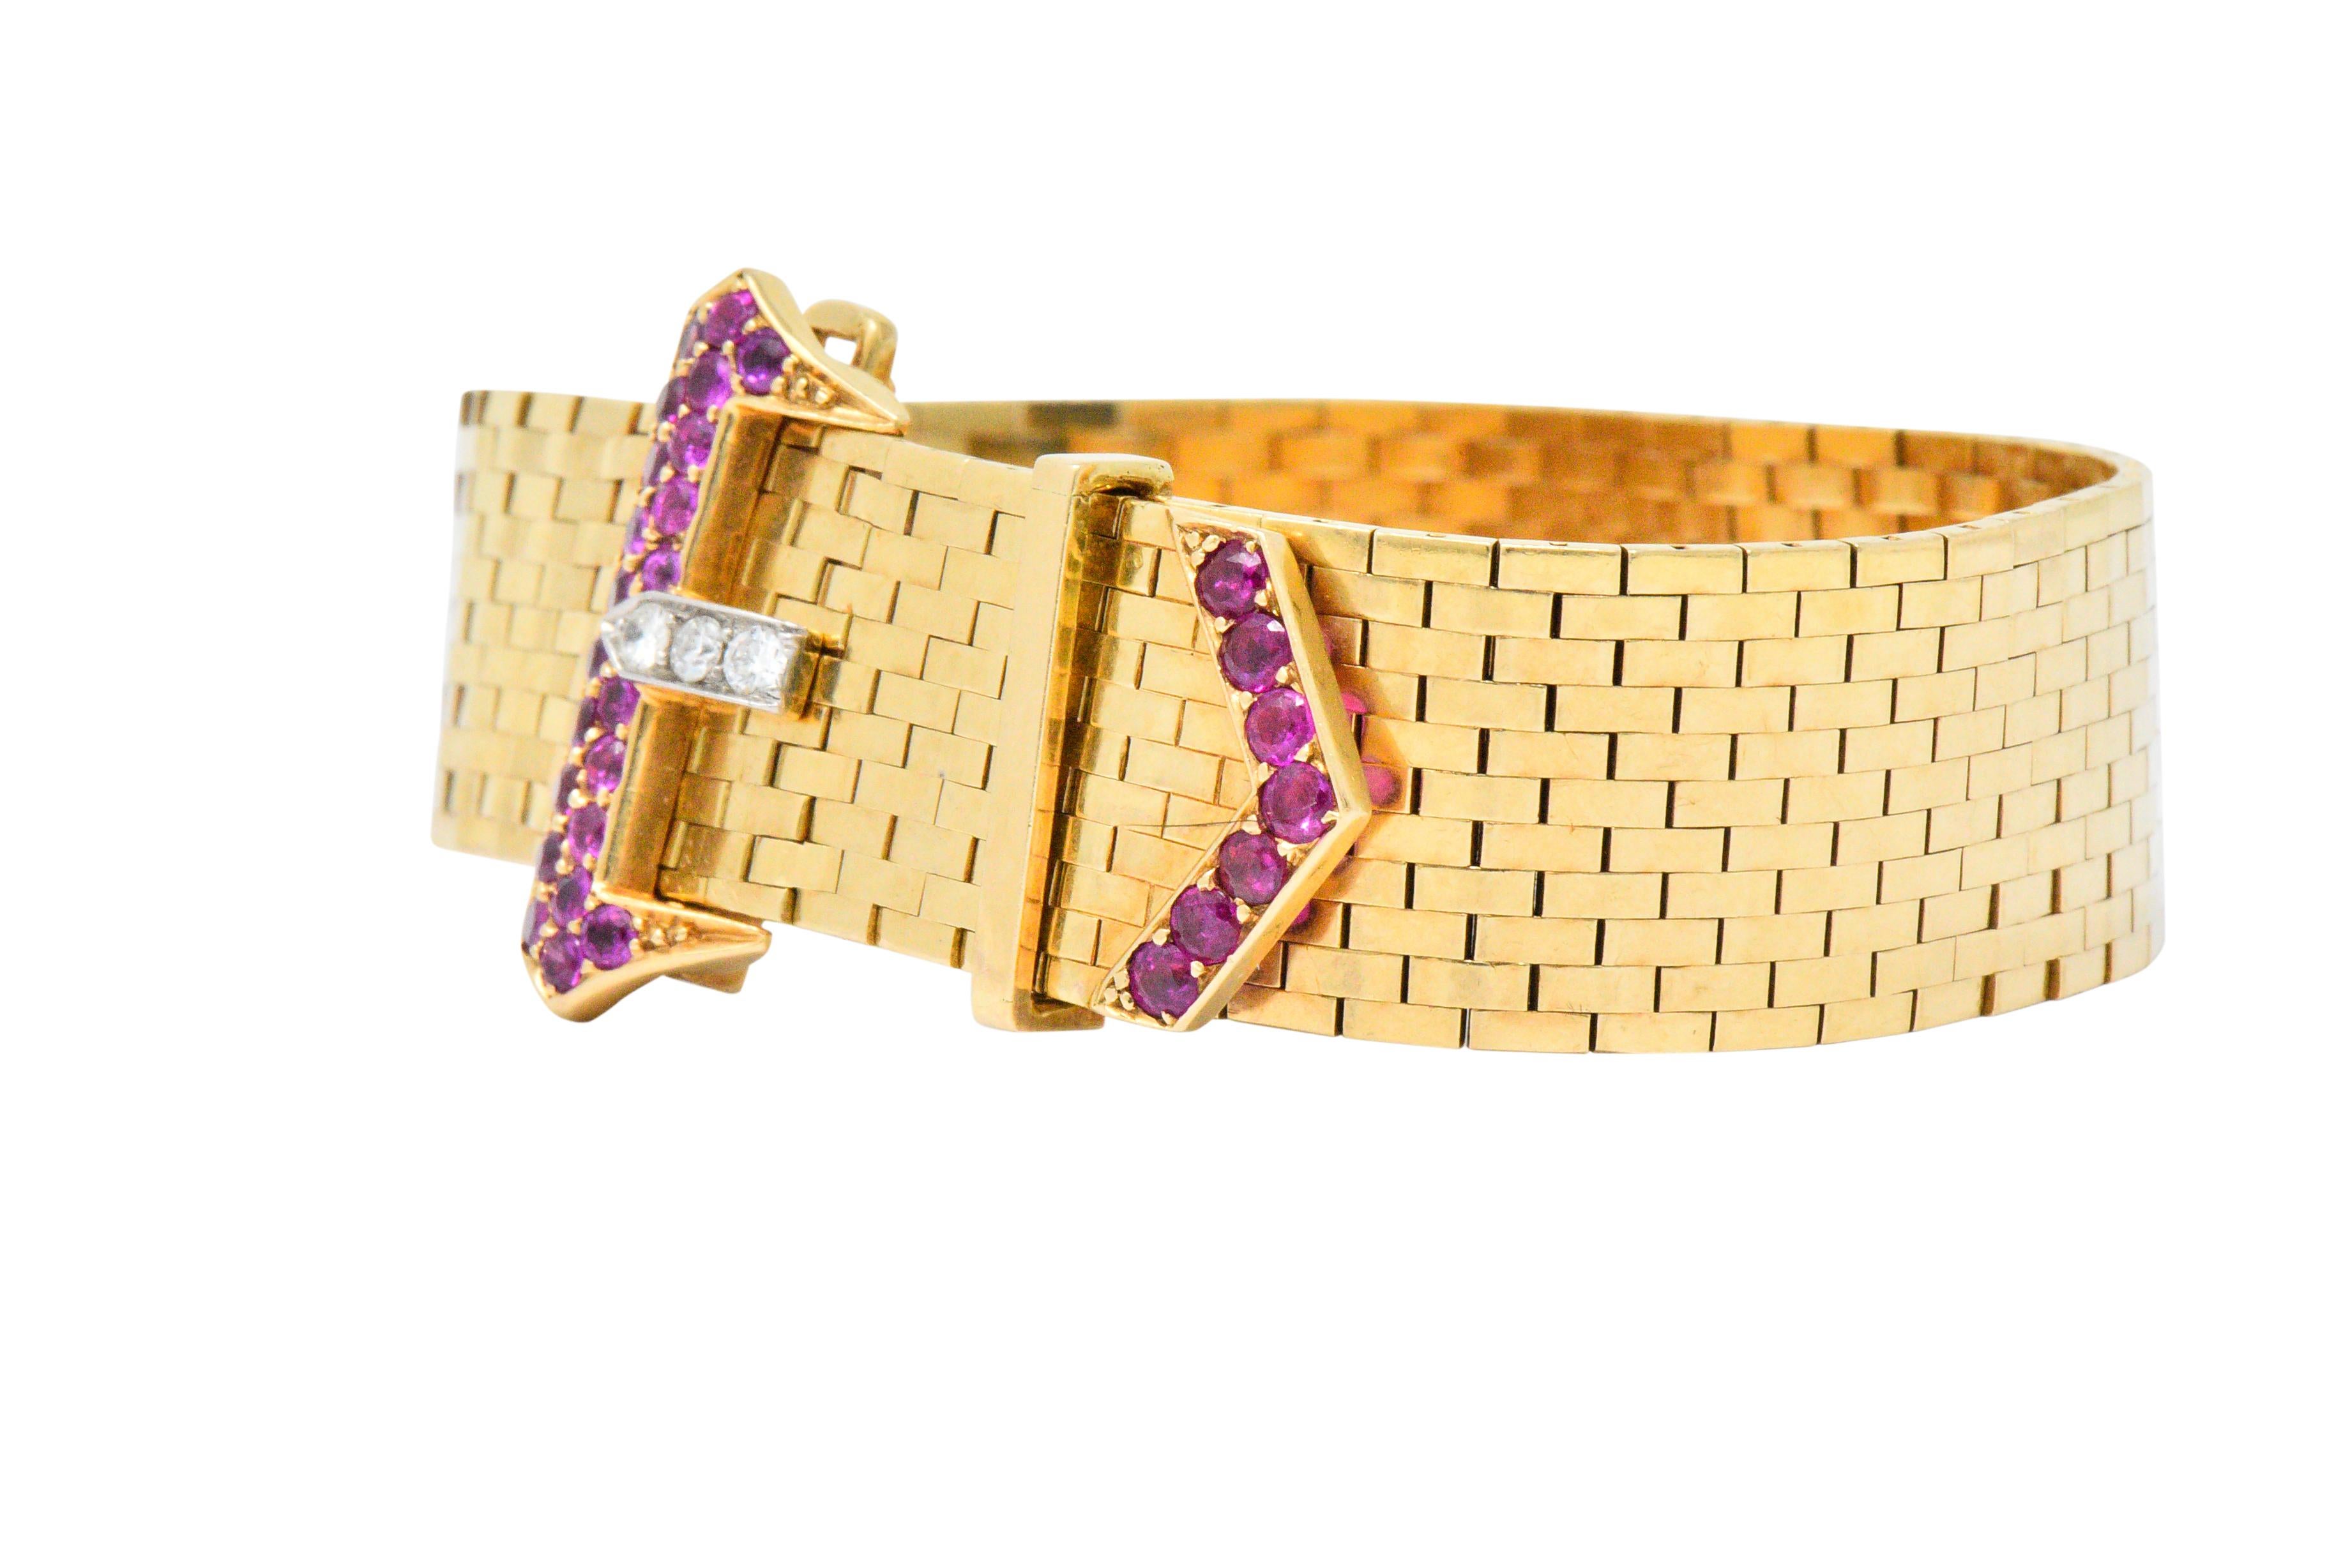 Featuring a highly polished, gold brick link bracelet with buckle

Buckle clasp set with round cut rubies and round cut ruby accents weighing approximately 1.25 carats, bright pinkish red

Additional round brilliant cut diamond accents weighing